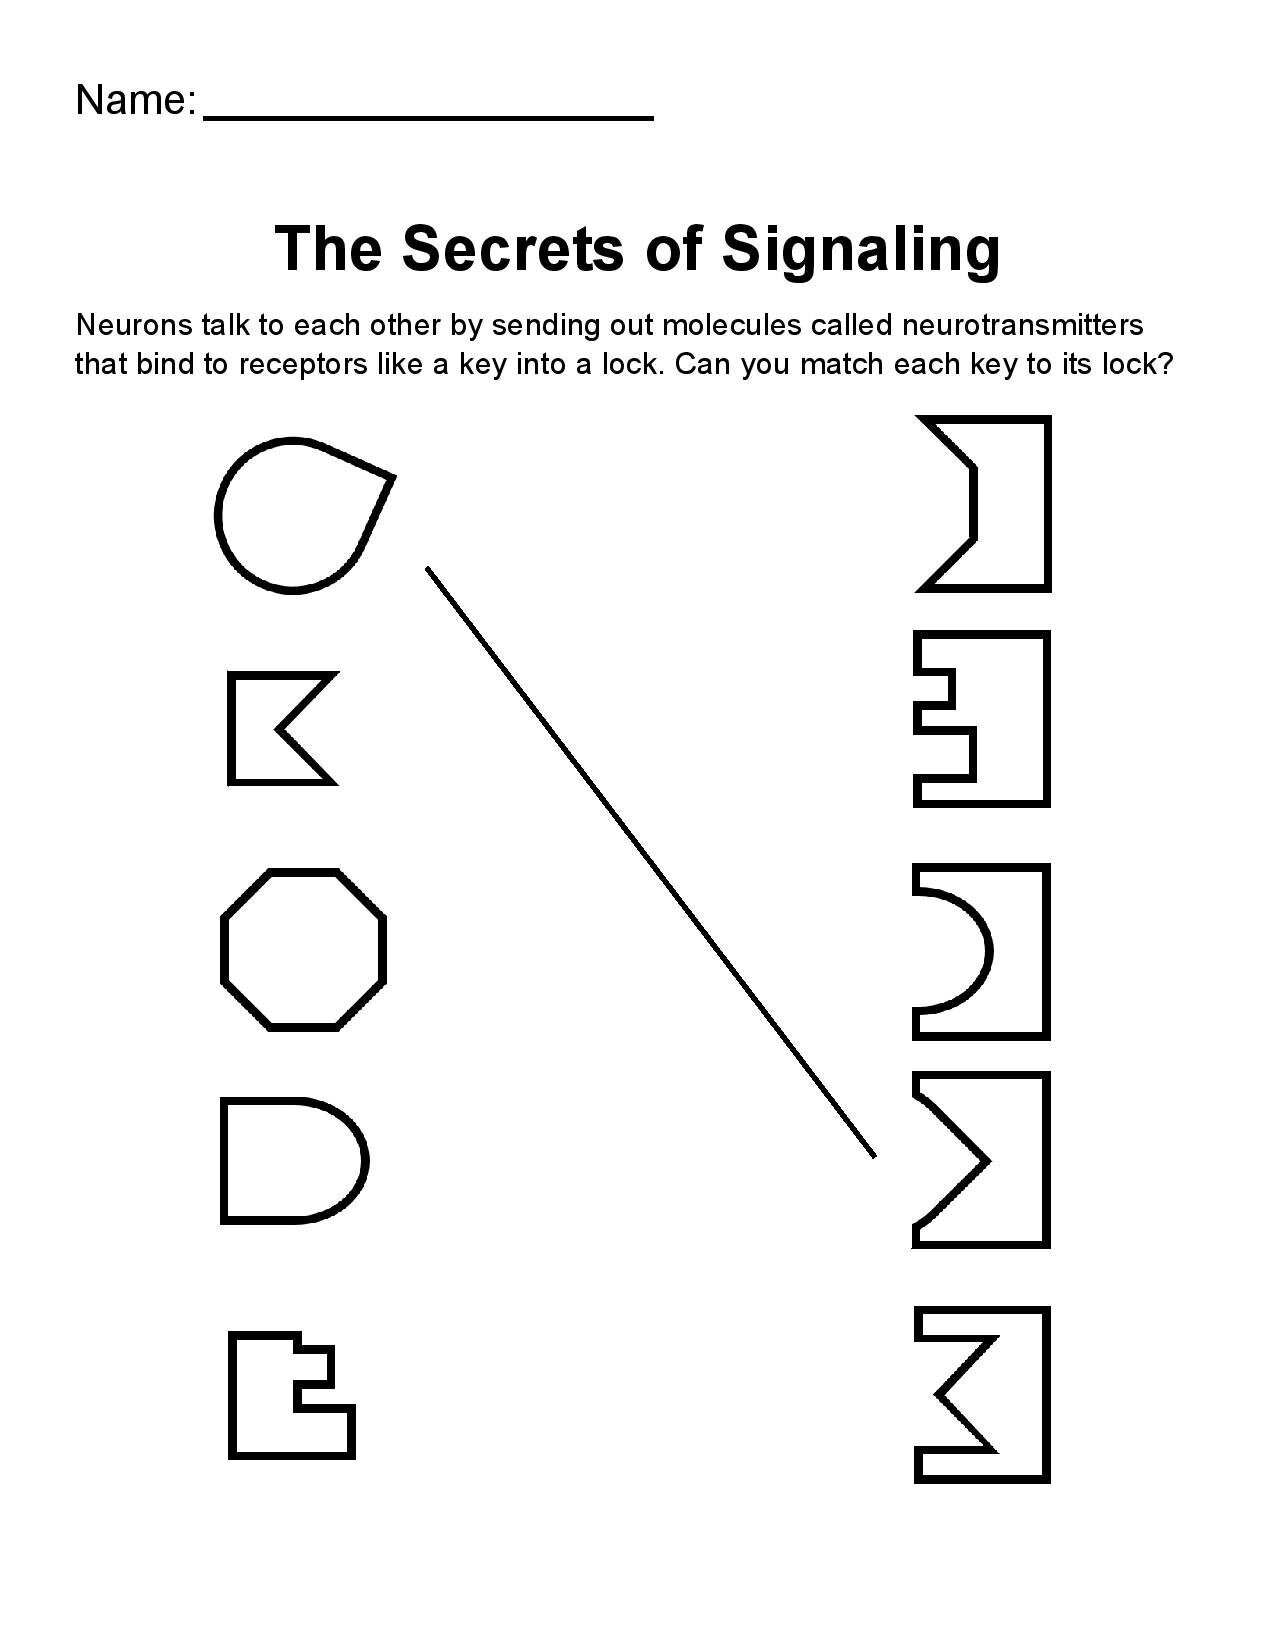 Match the signals: Answers